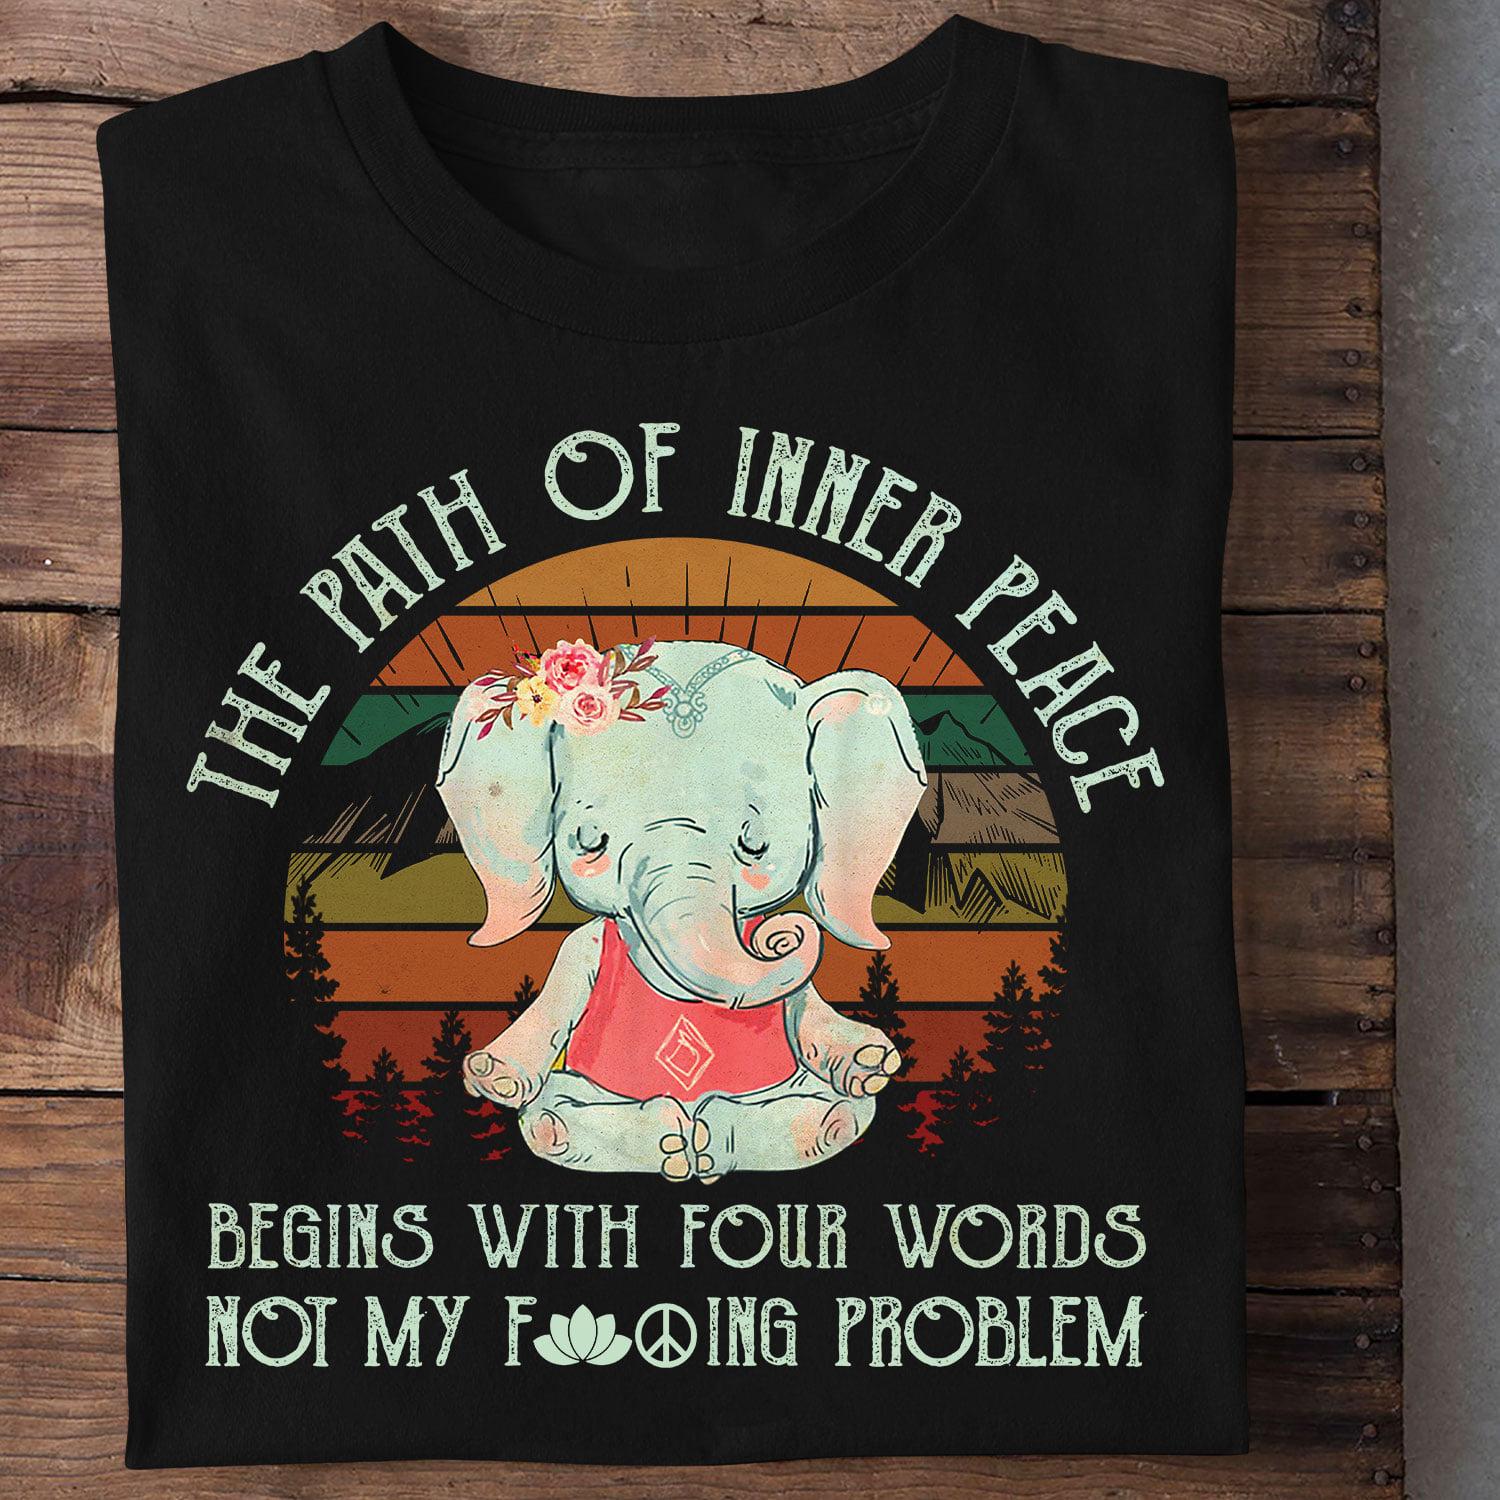 Little Elephant Yoga - The path of inner peace begins with four words not my f problem